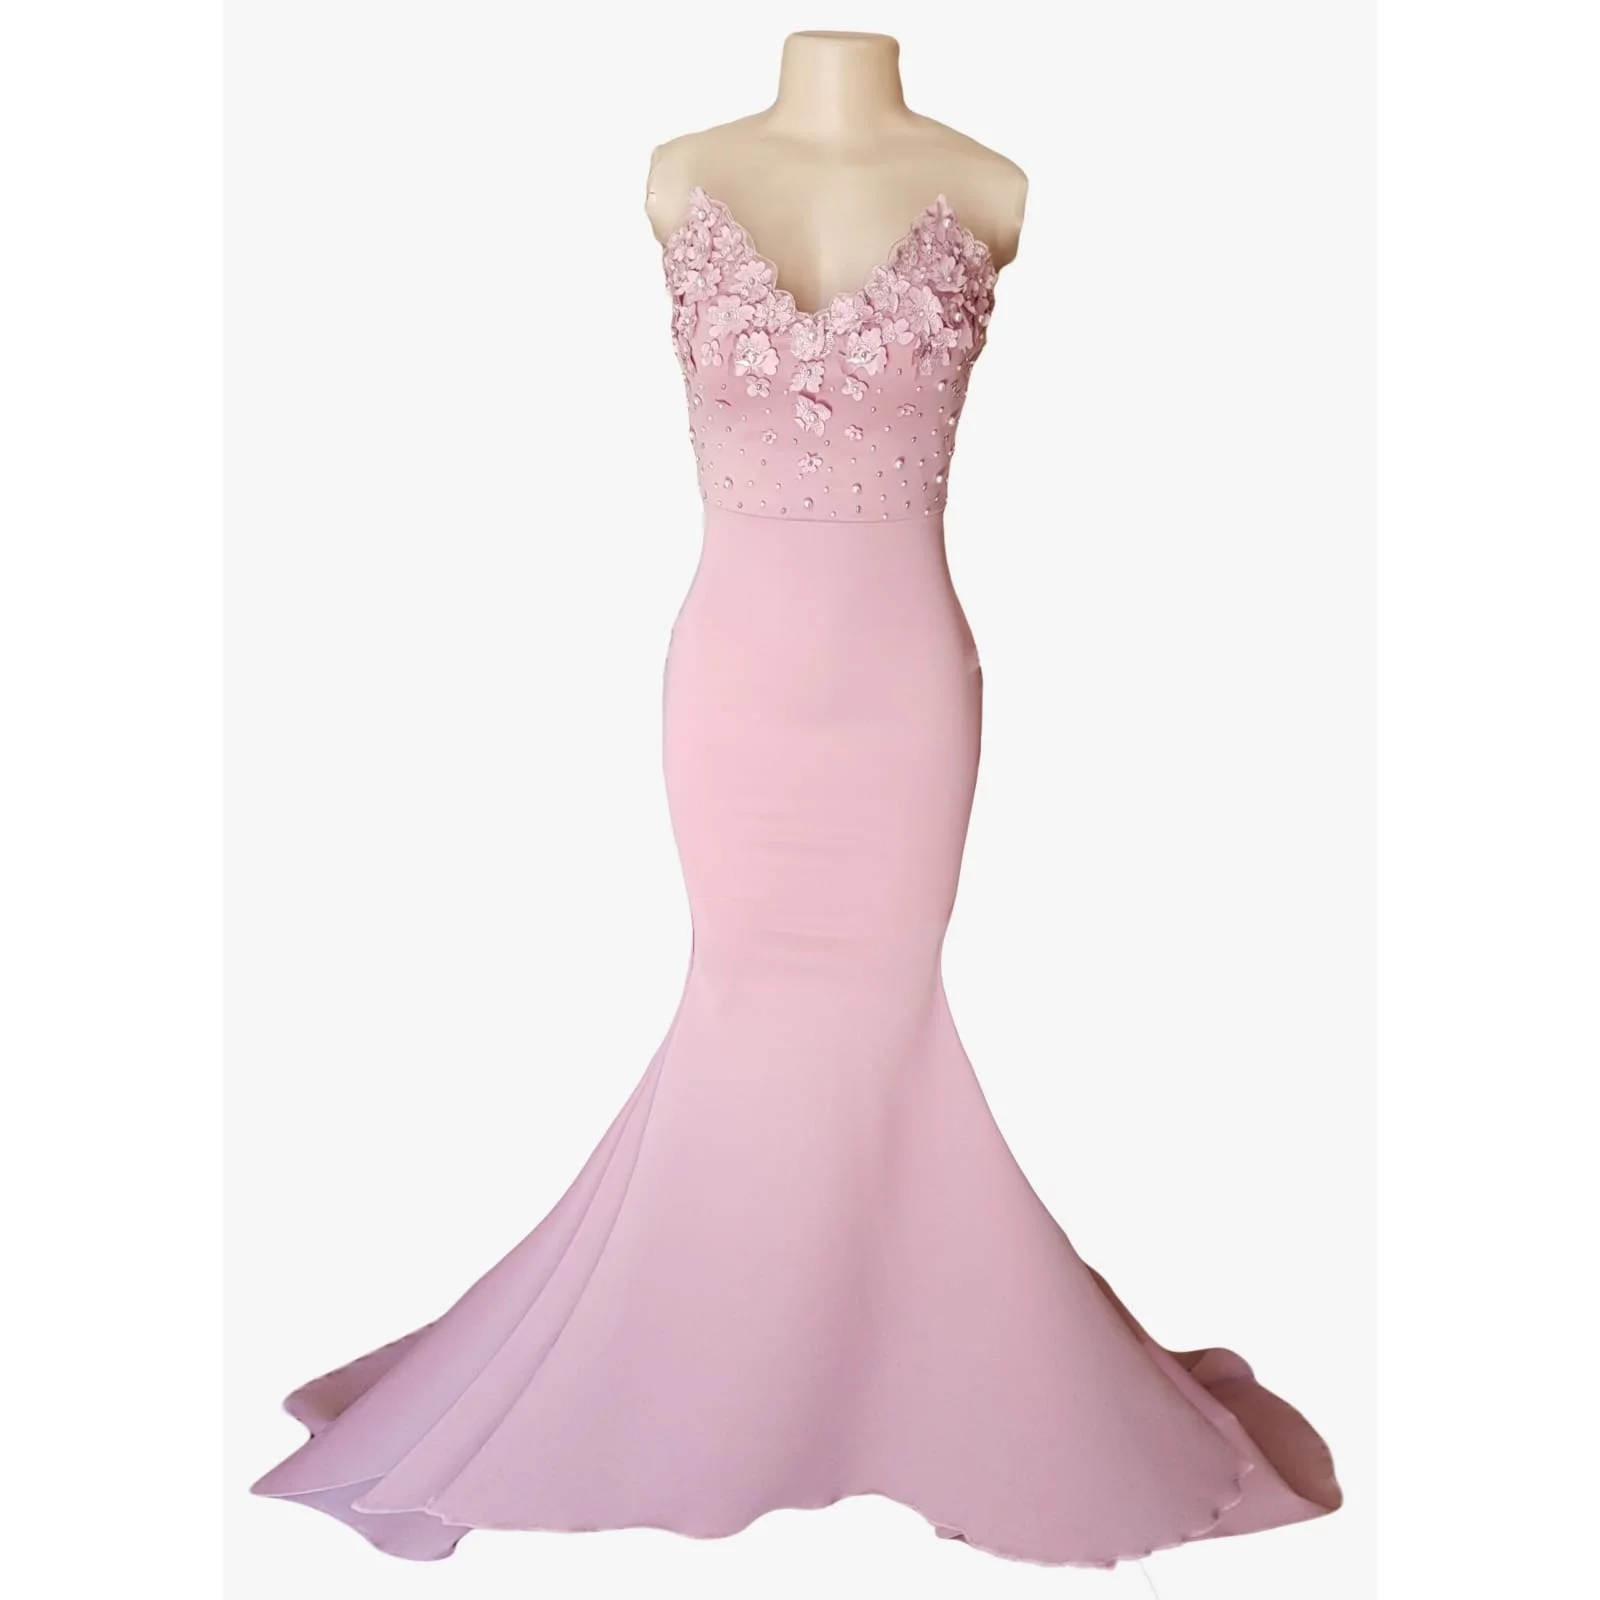 Pale pink soft mermaid prom dress 6 pale pink soft mermaid prom dress, bodice detailed with pearls and 3d lace, with a train and detachable neck strap.